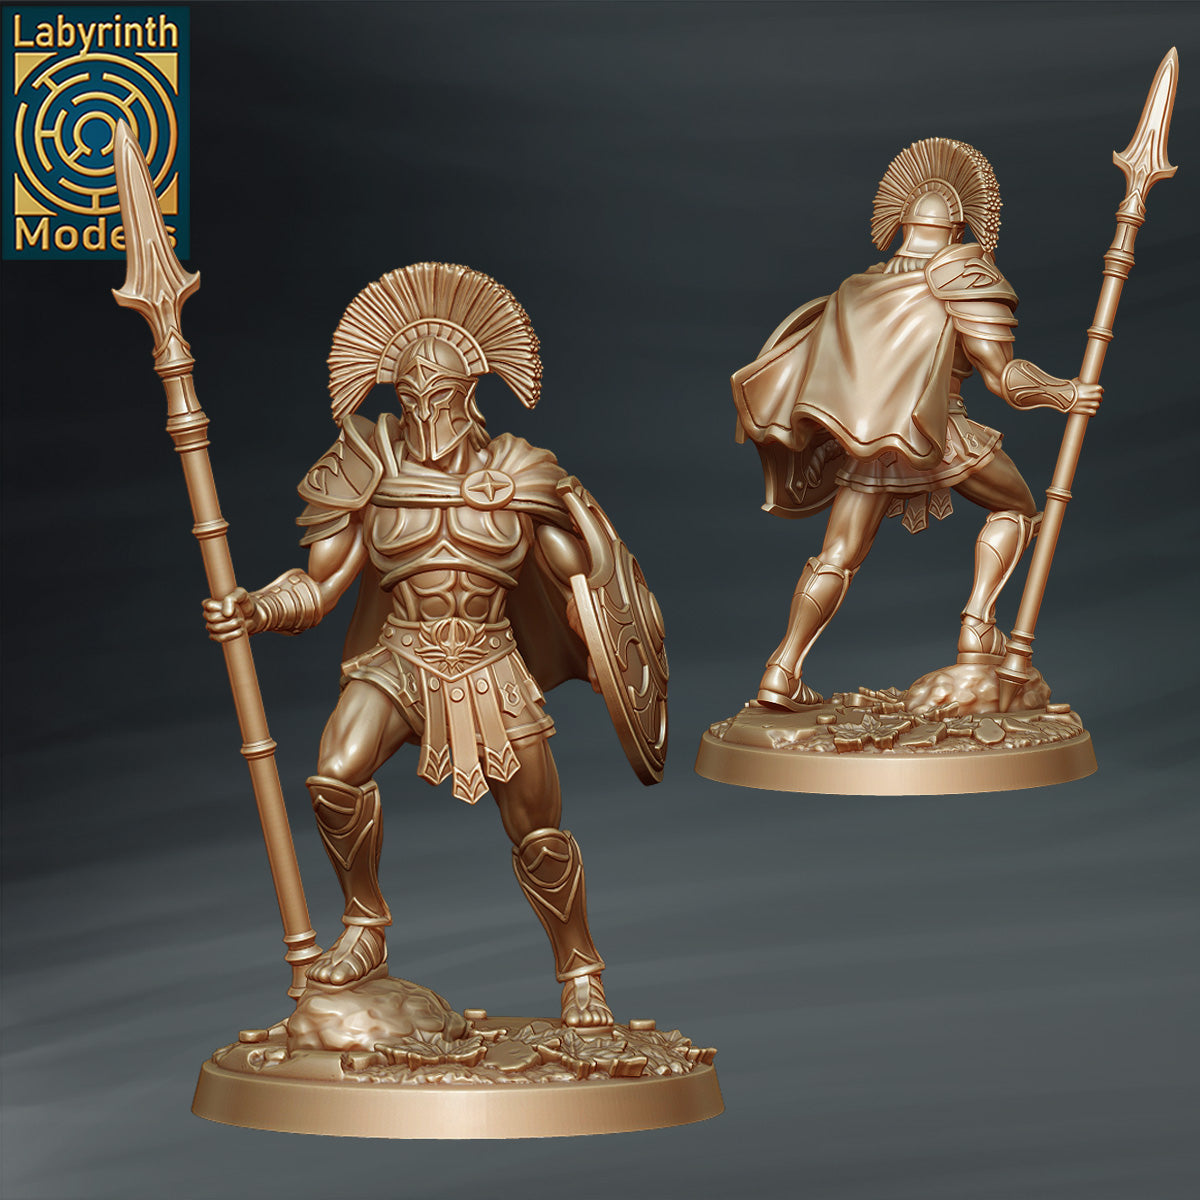 Warriors of Ares by Labyrinth Models